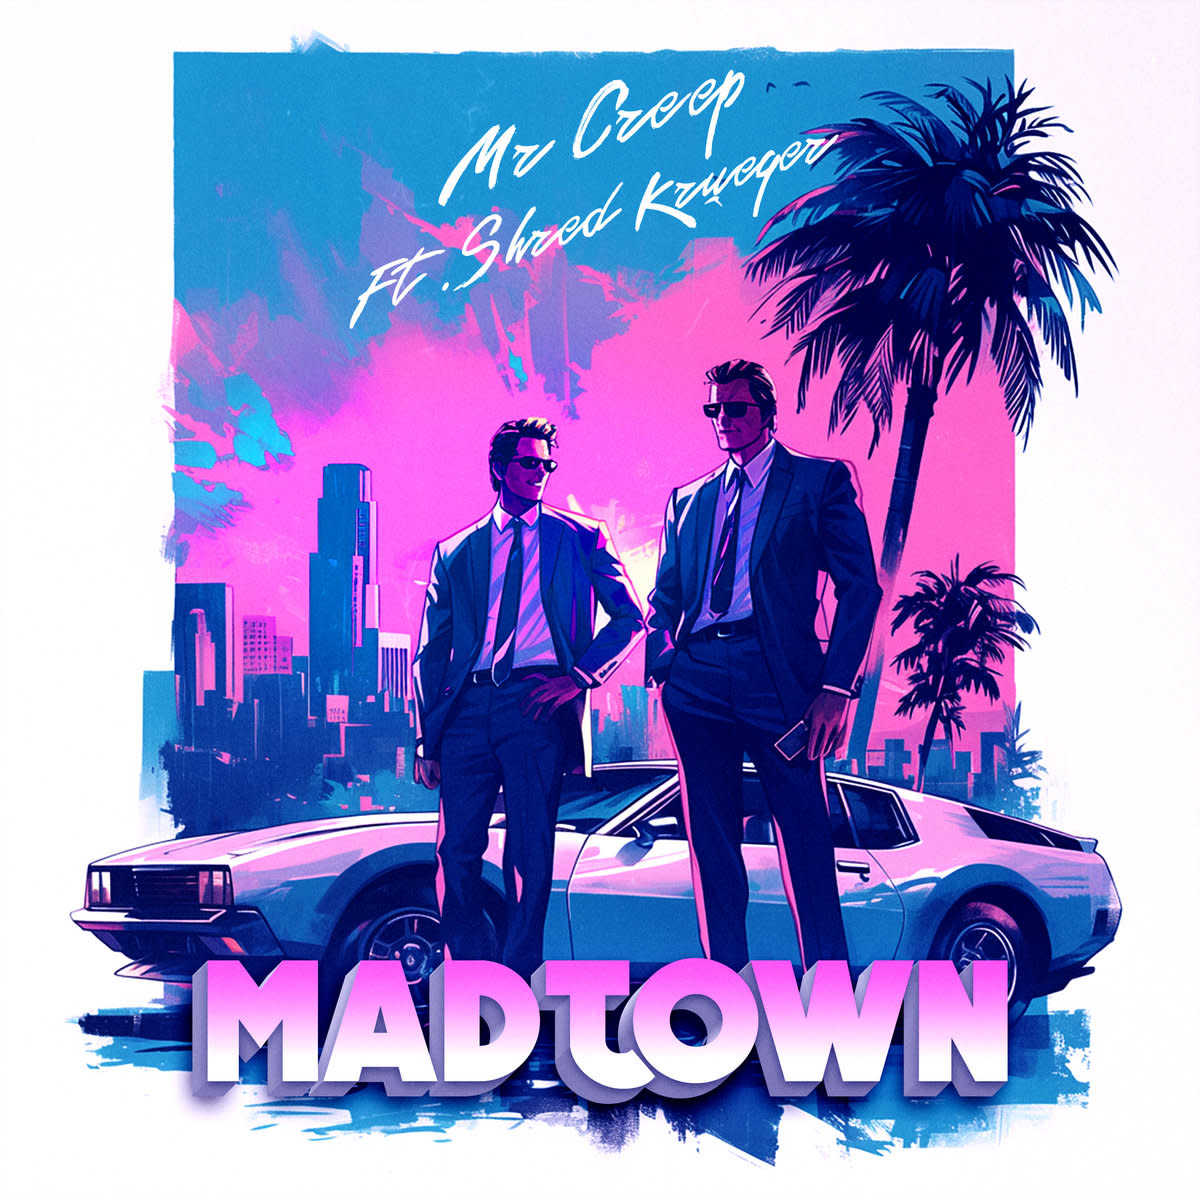 Synth Single Review: “MadTown’’ by Mr Creep & Shred Krueger